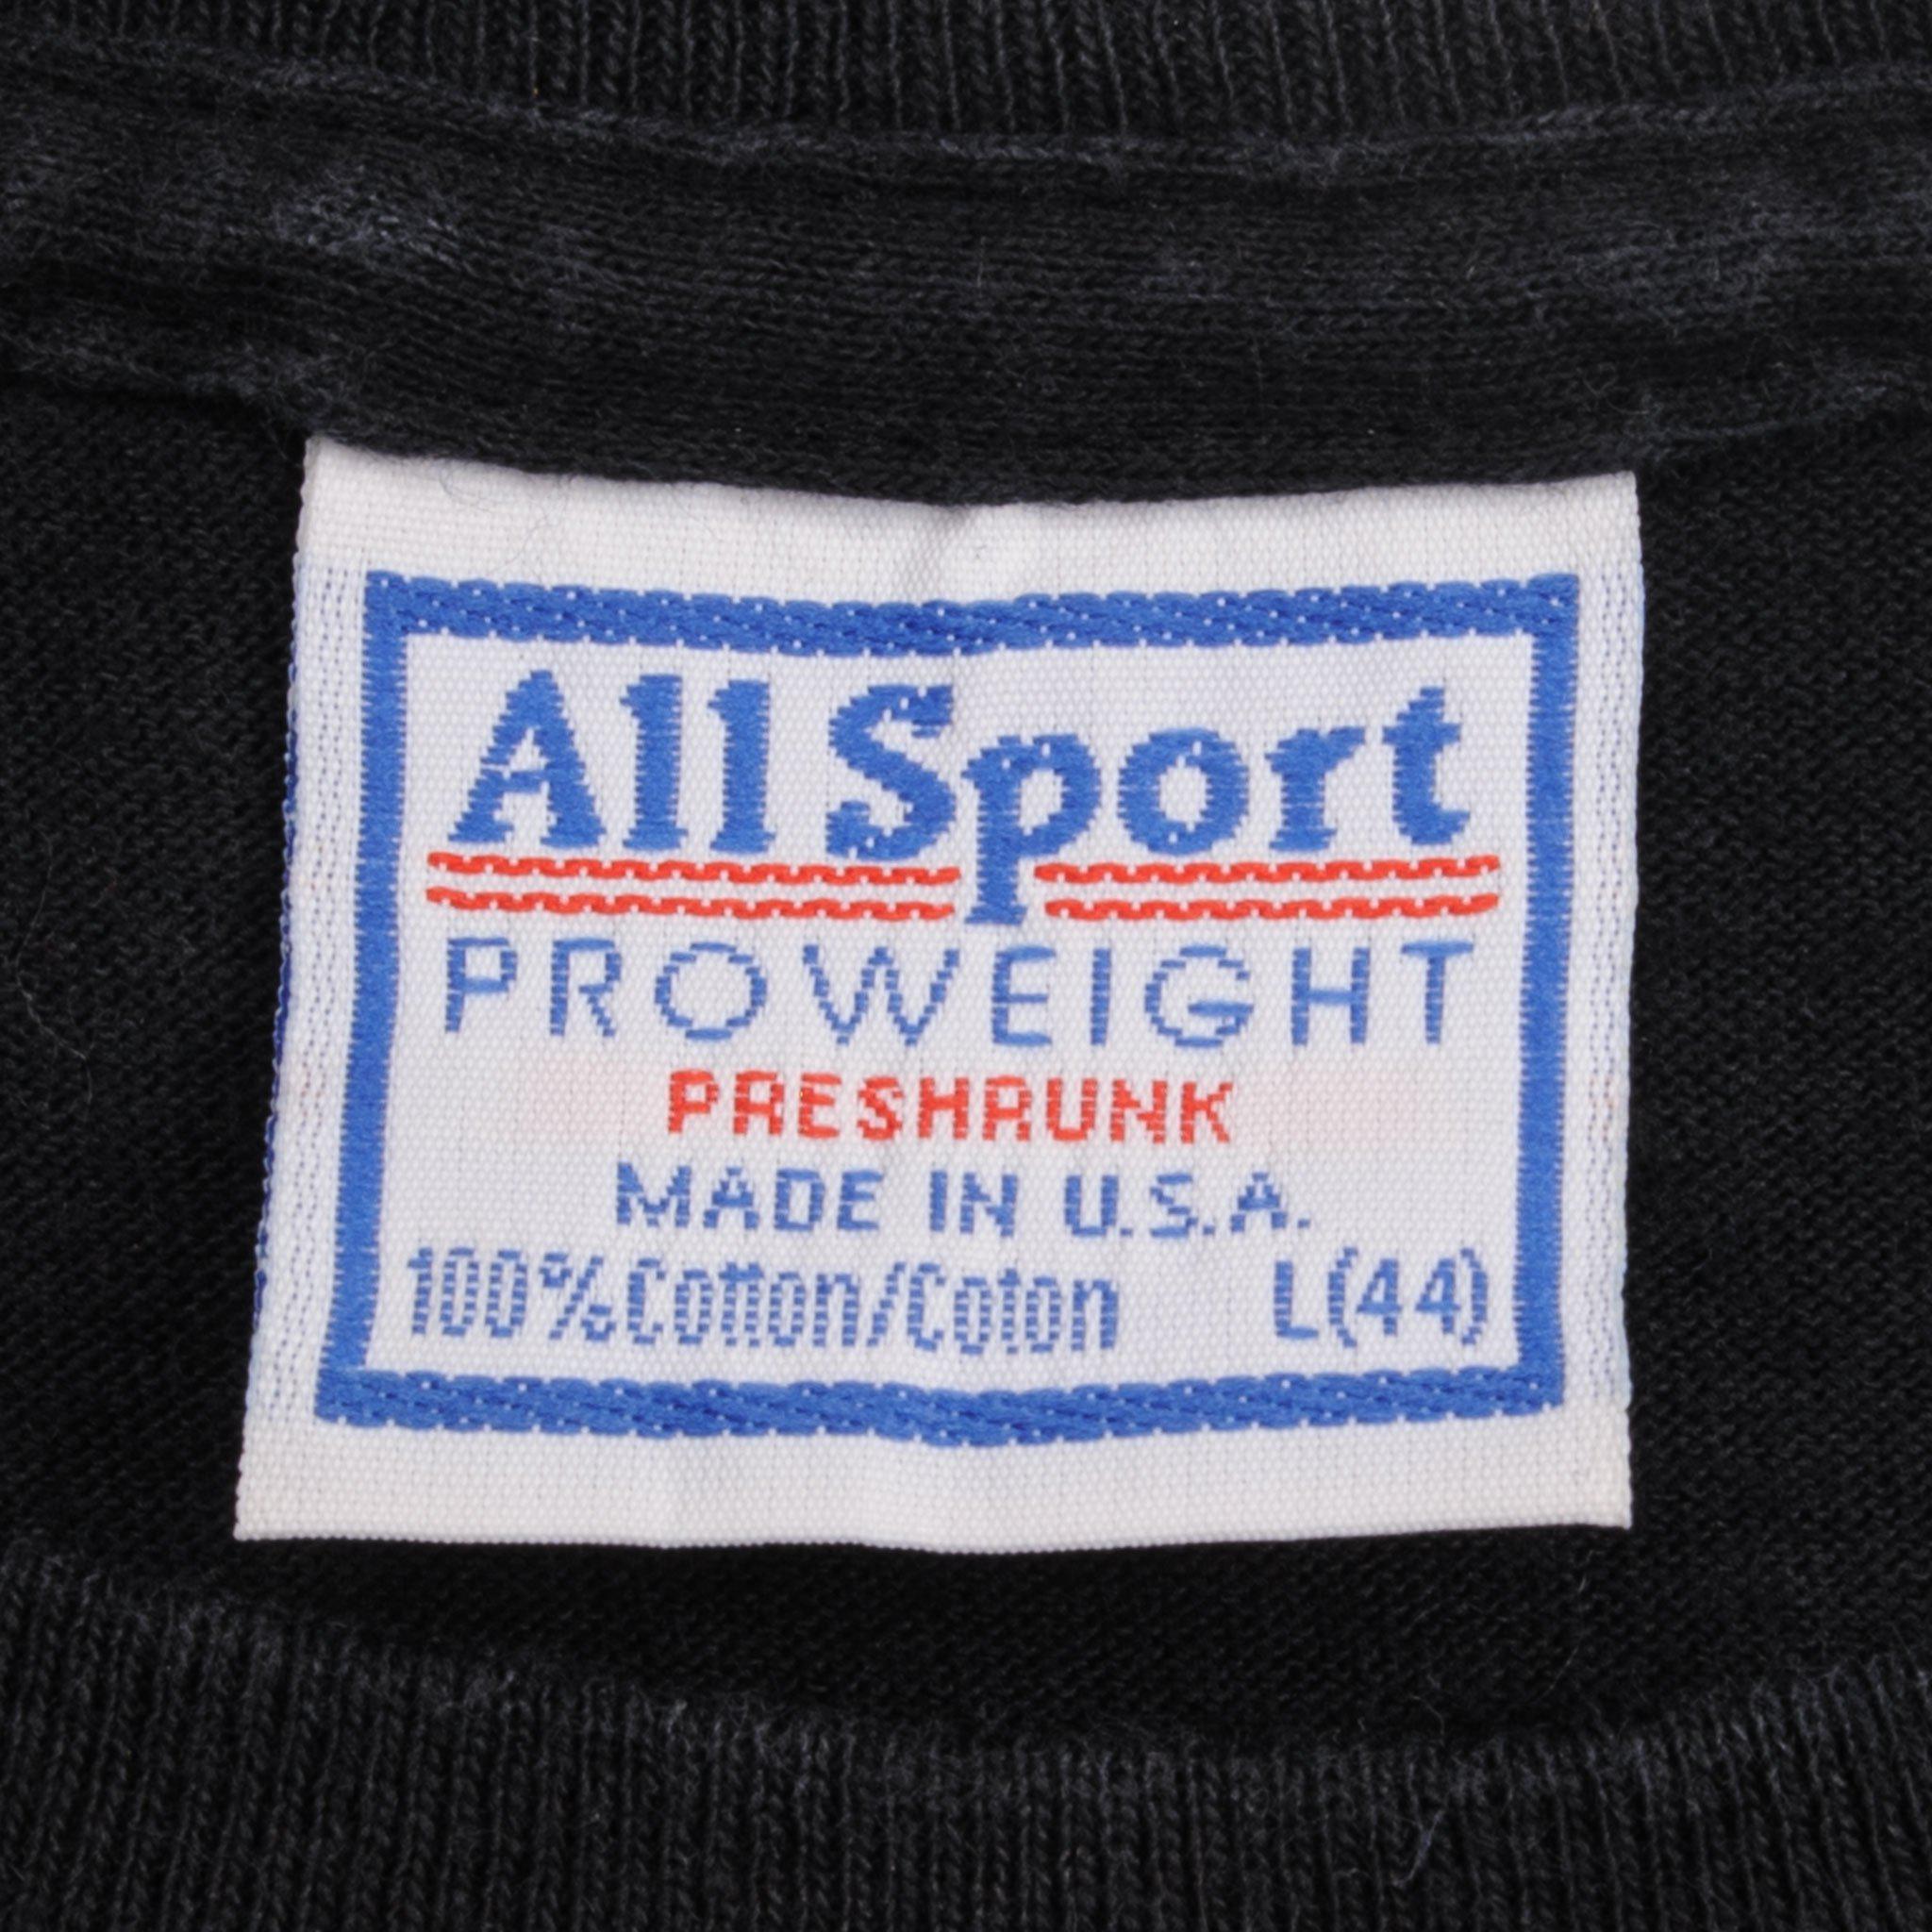 Vintage World Champs Chicago Bulls “Chi Town Finest” Blue Jean